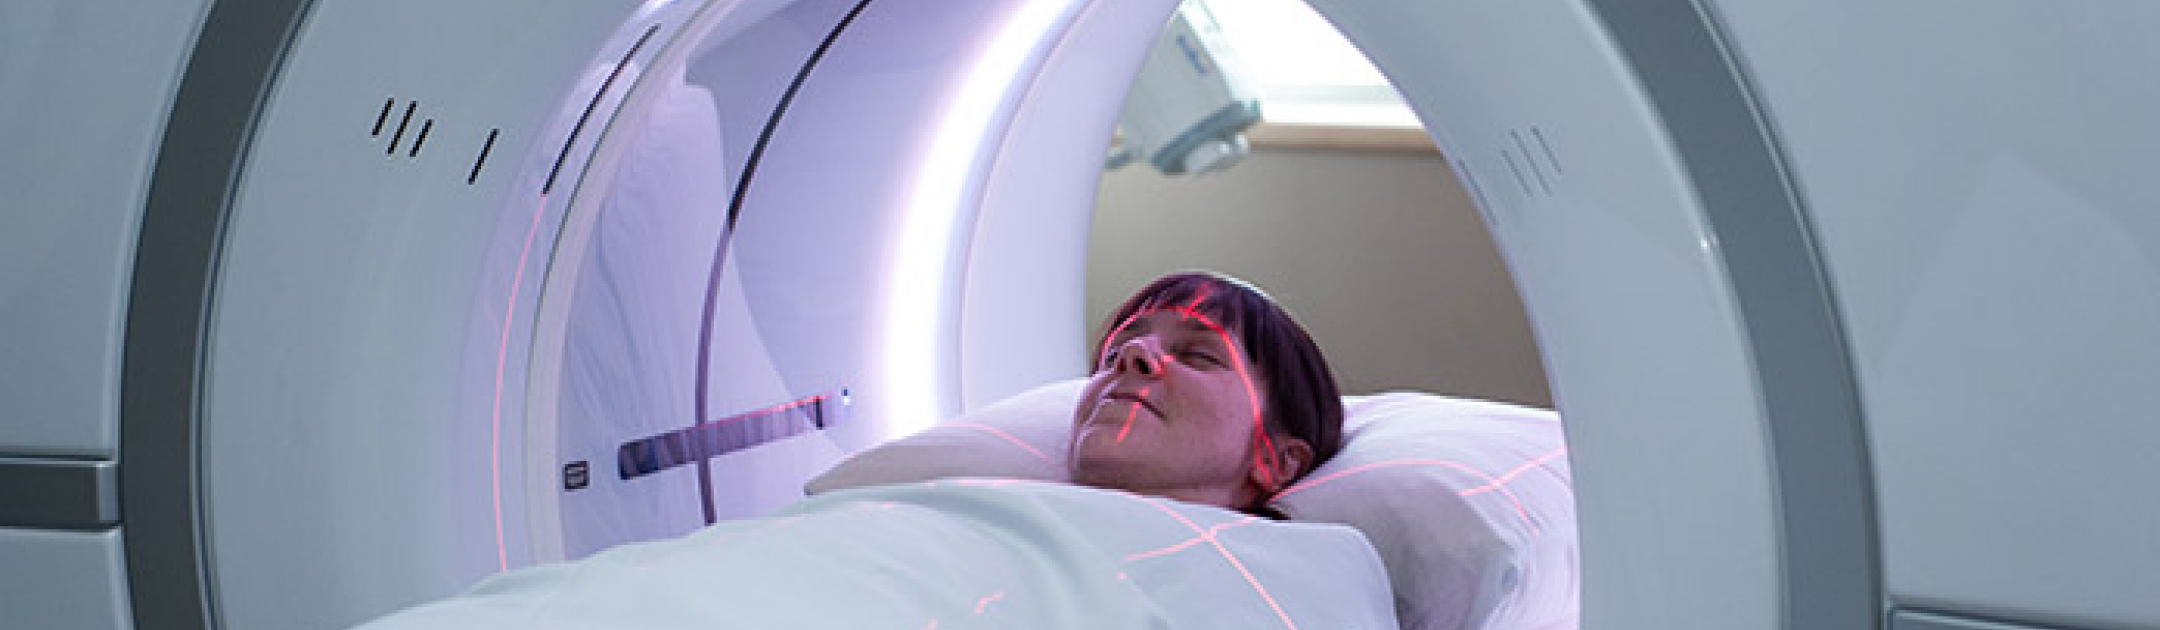 Woman getting a CT scan